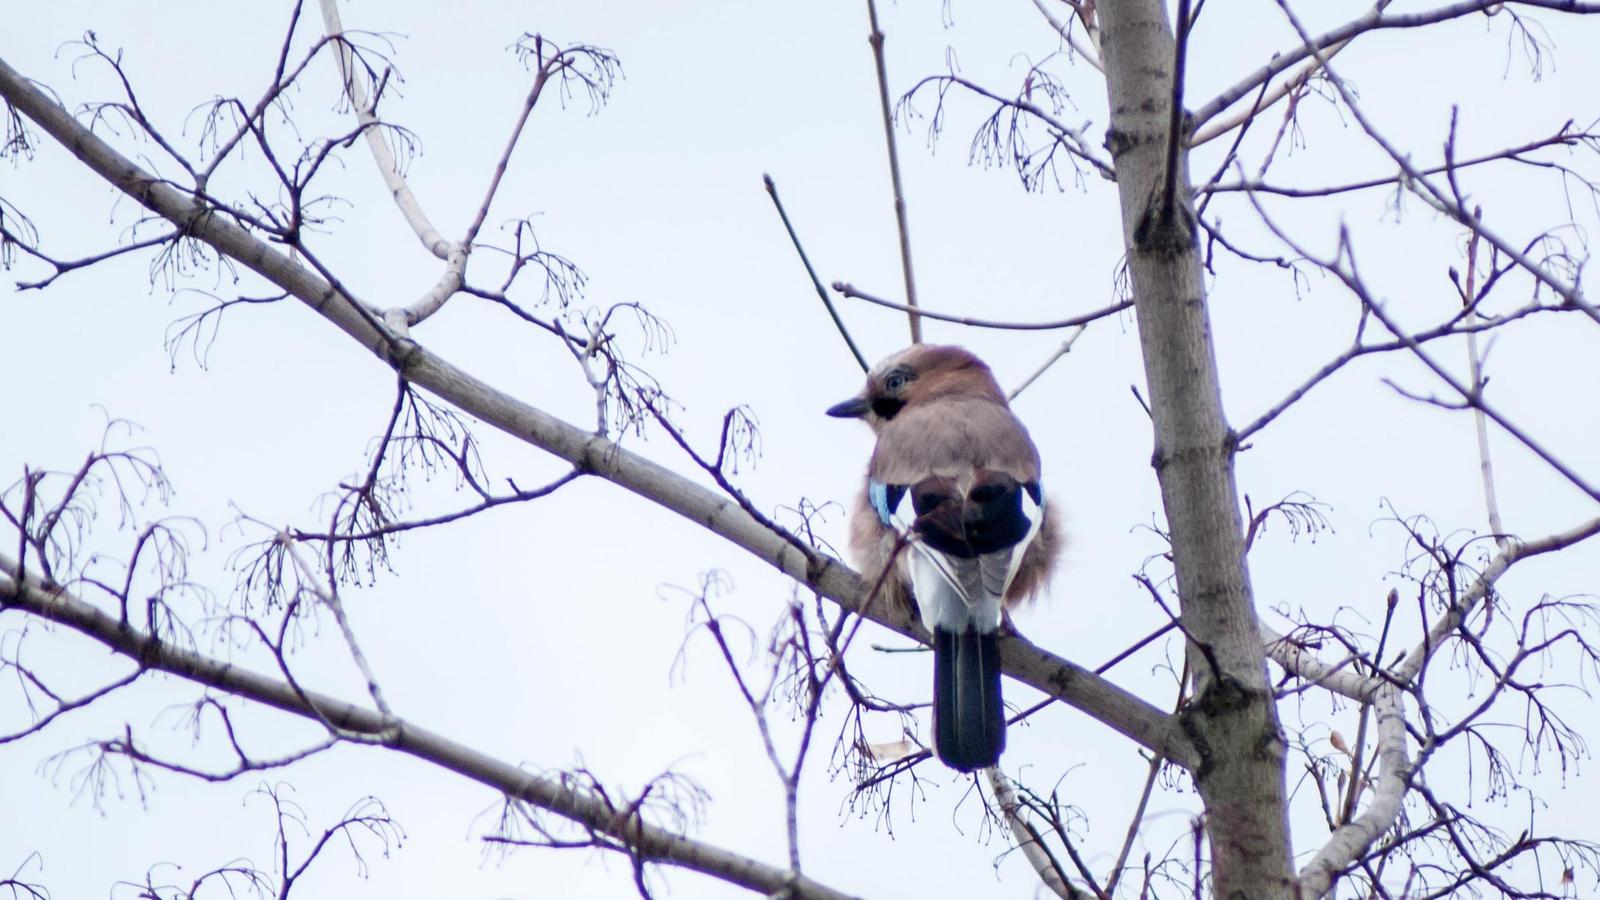 Eurasian Jay Photo by African Googre